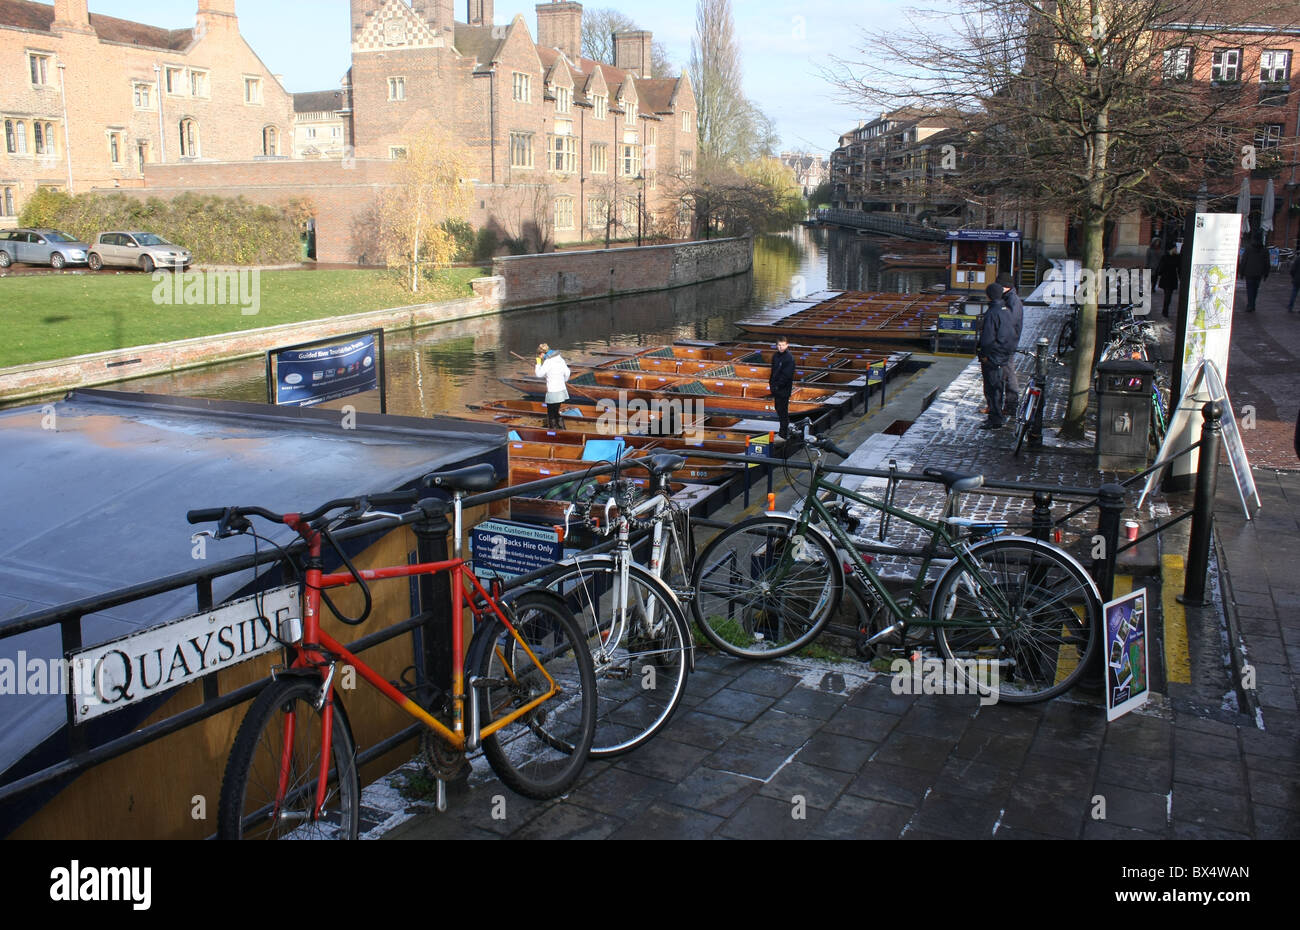 Punts and cycles in Cambridge Stock Photo